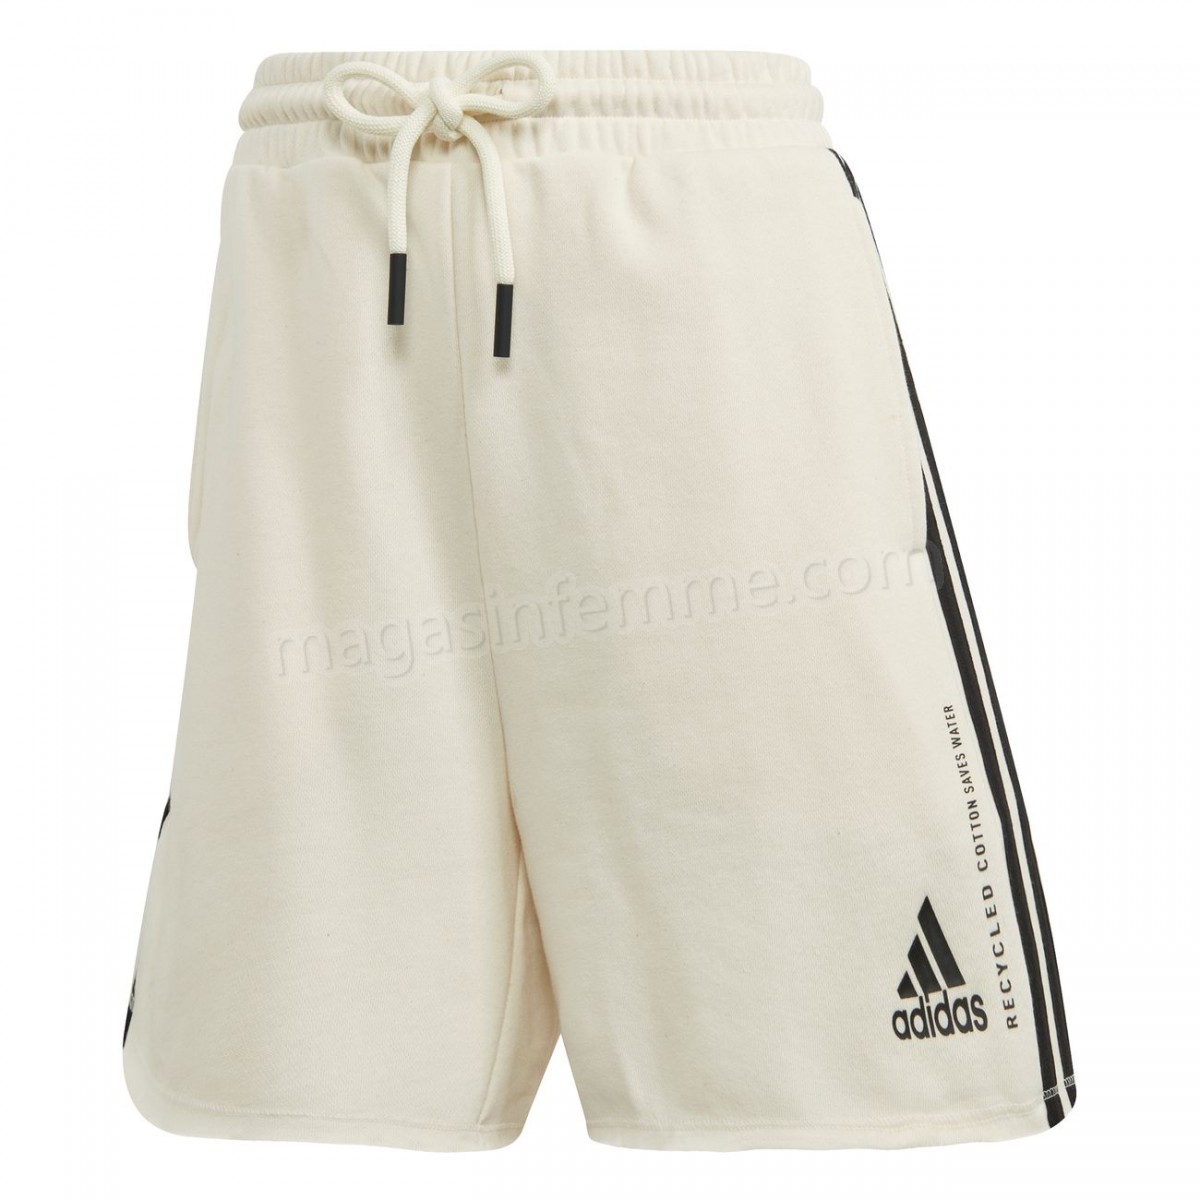 Adidas-Fitness femme ADIDAS Short femme adidas Must Haves Recycled Cotton en solde - -0